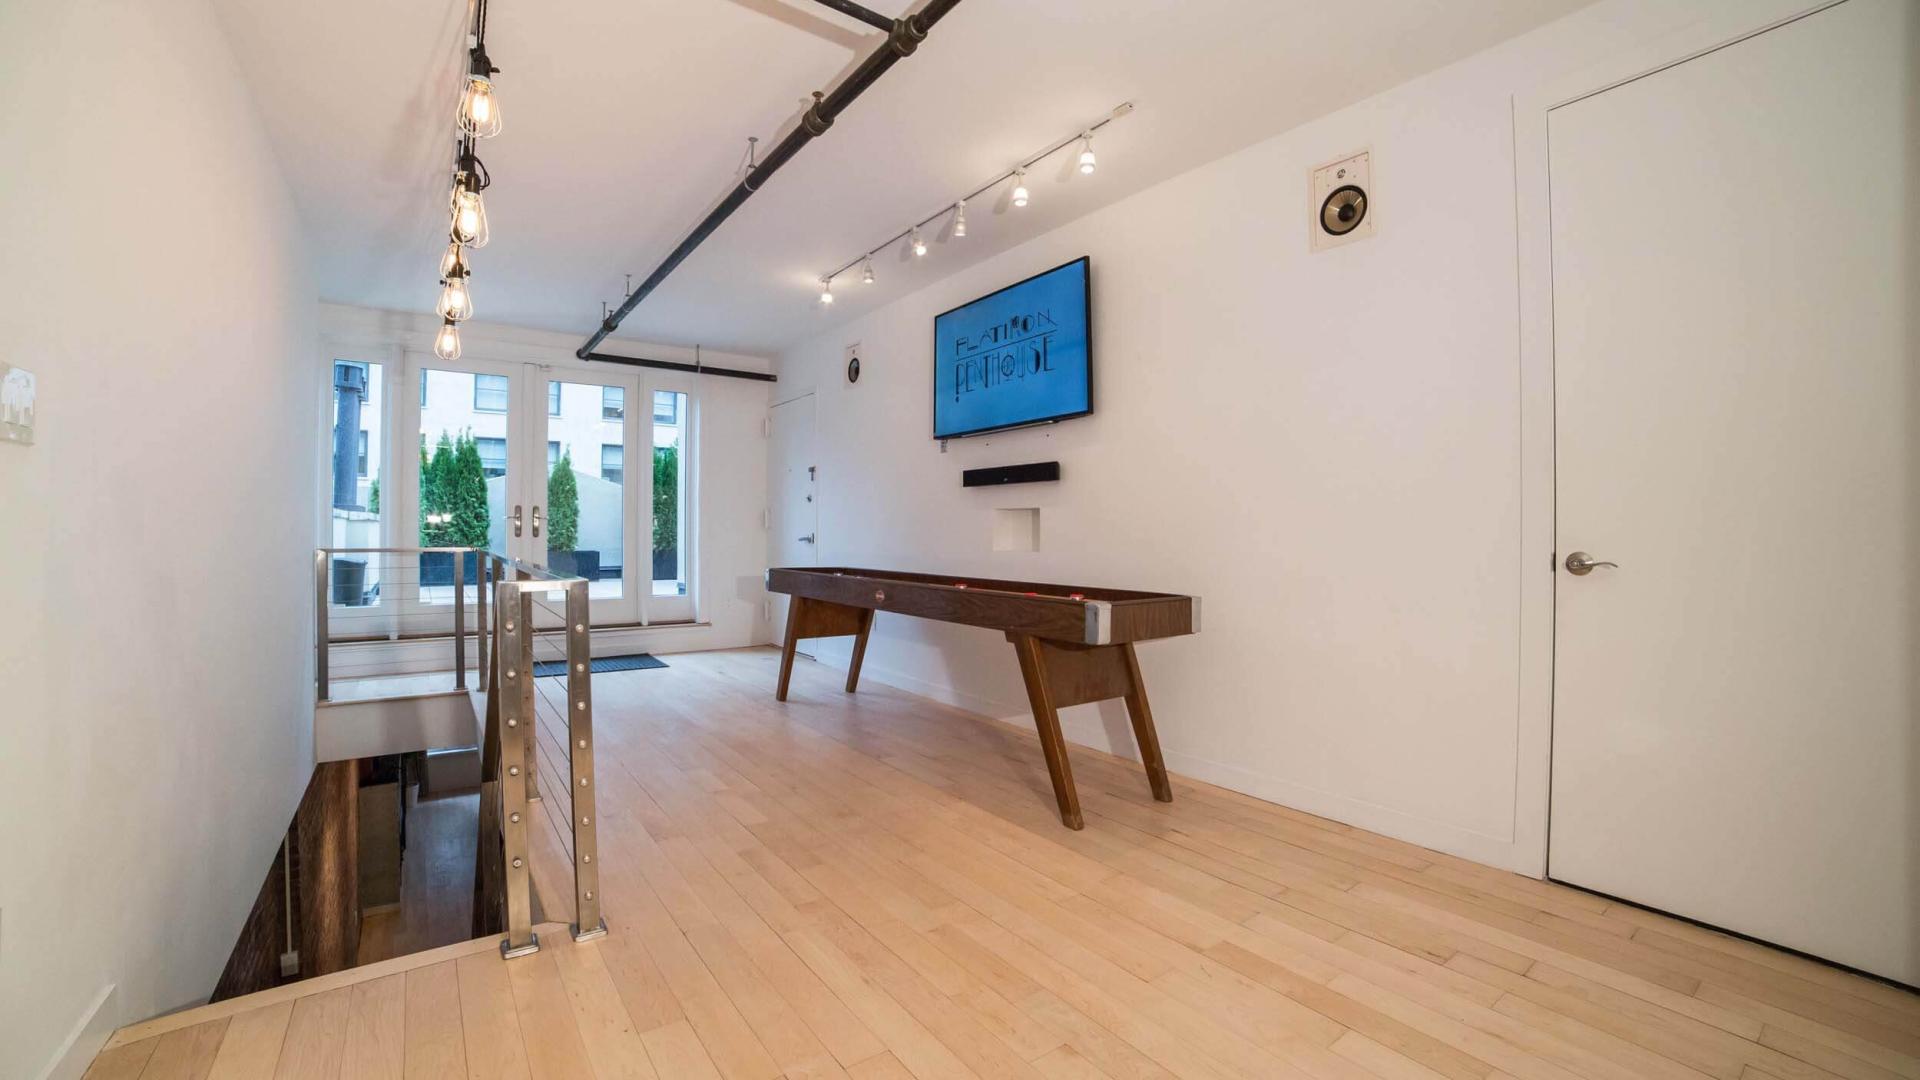 Offsite Meeting Rooms for Rent in New York City, NY